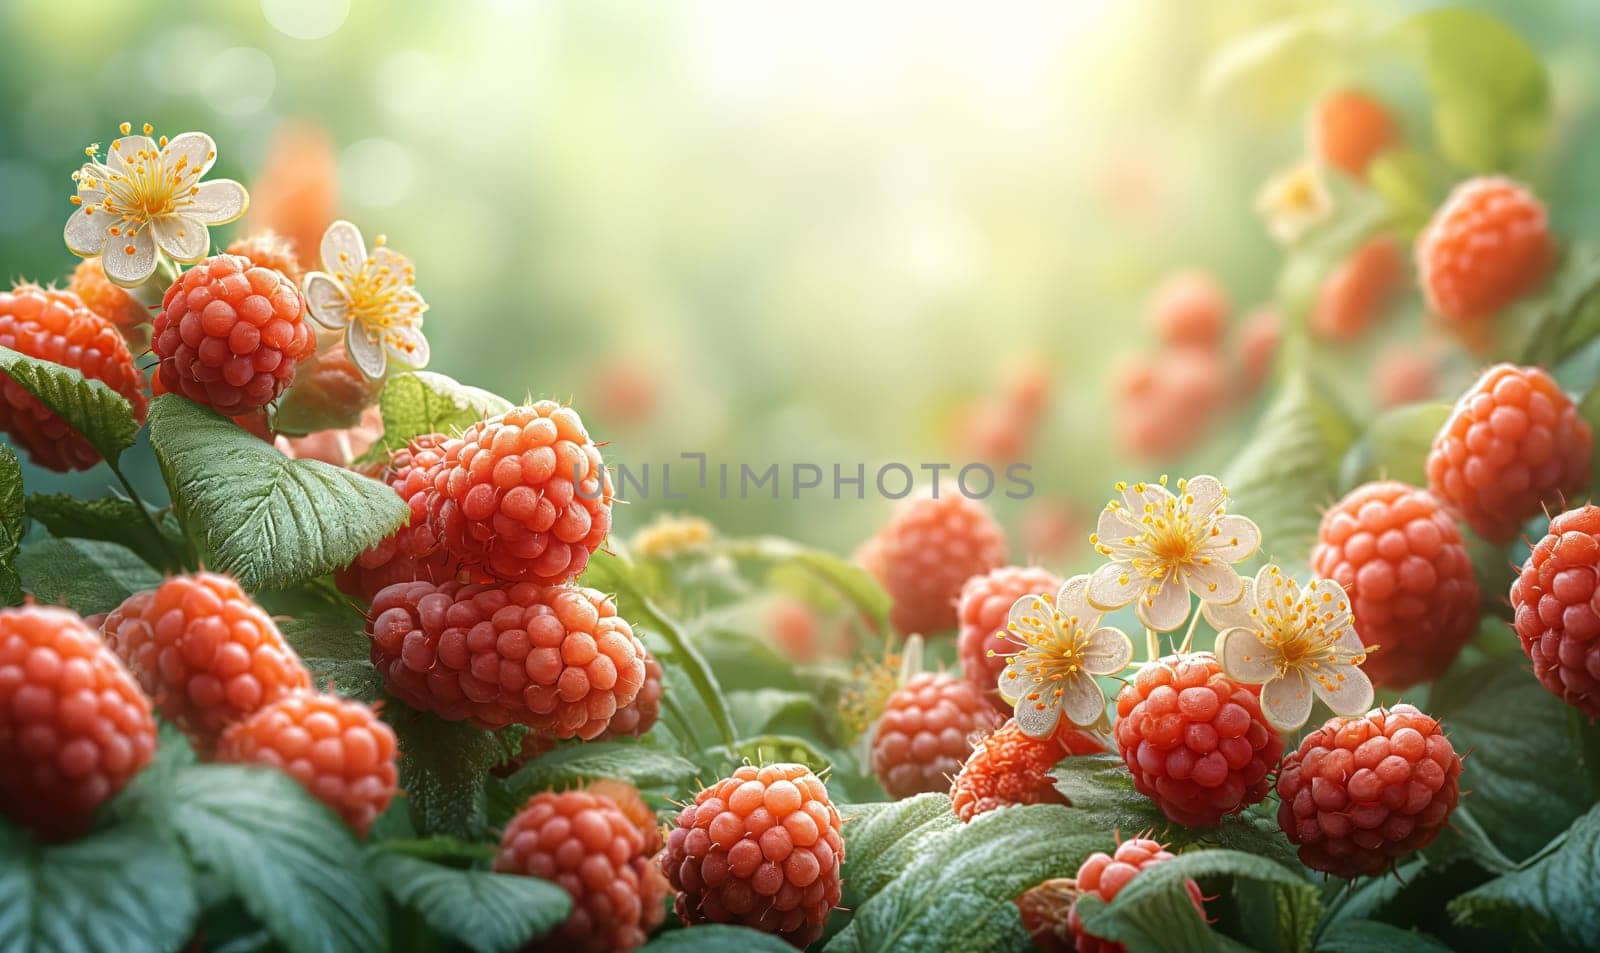 Raspberry berries and white flowers in sunlight. by Fischeron